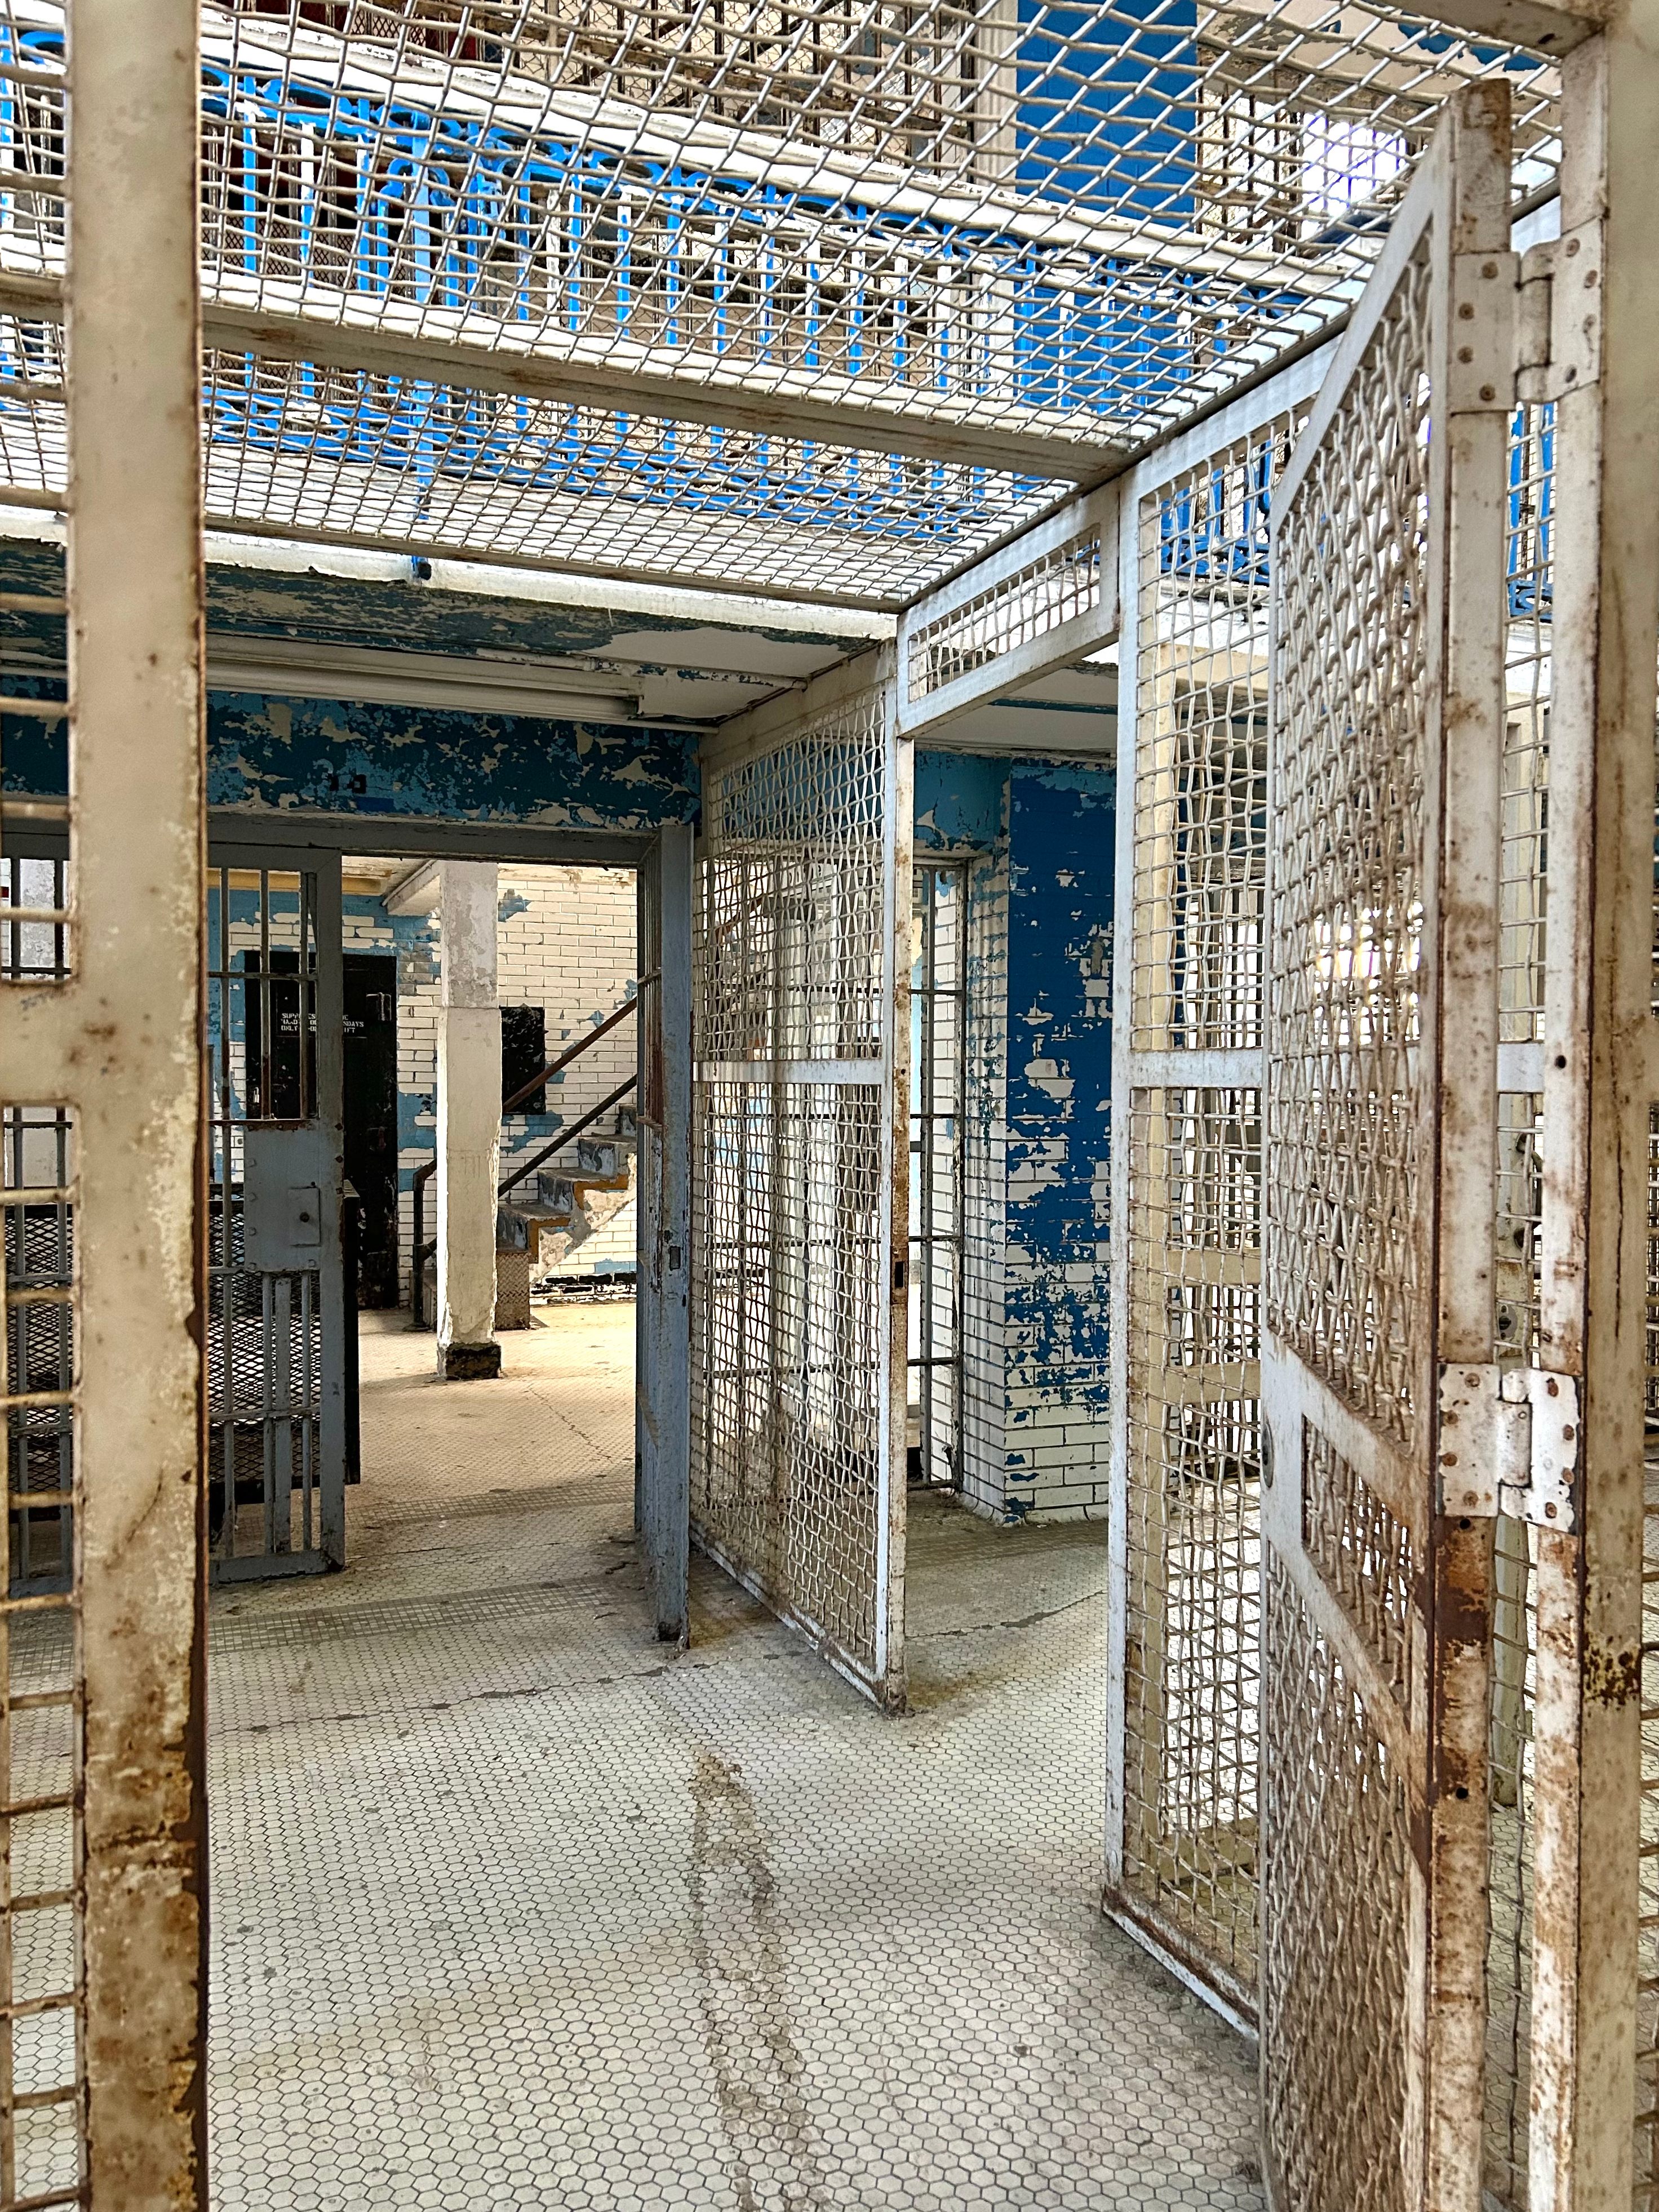 Additional security cages were installed in House 3 after the 1954 inmate riots.